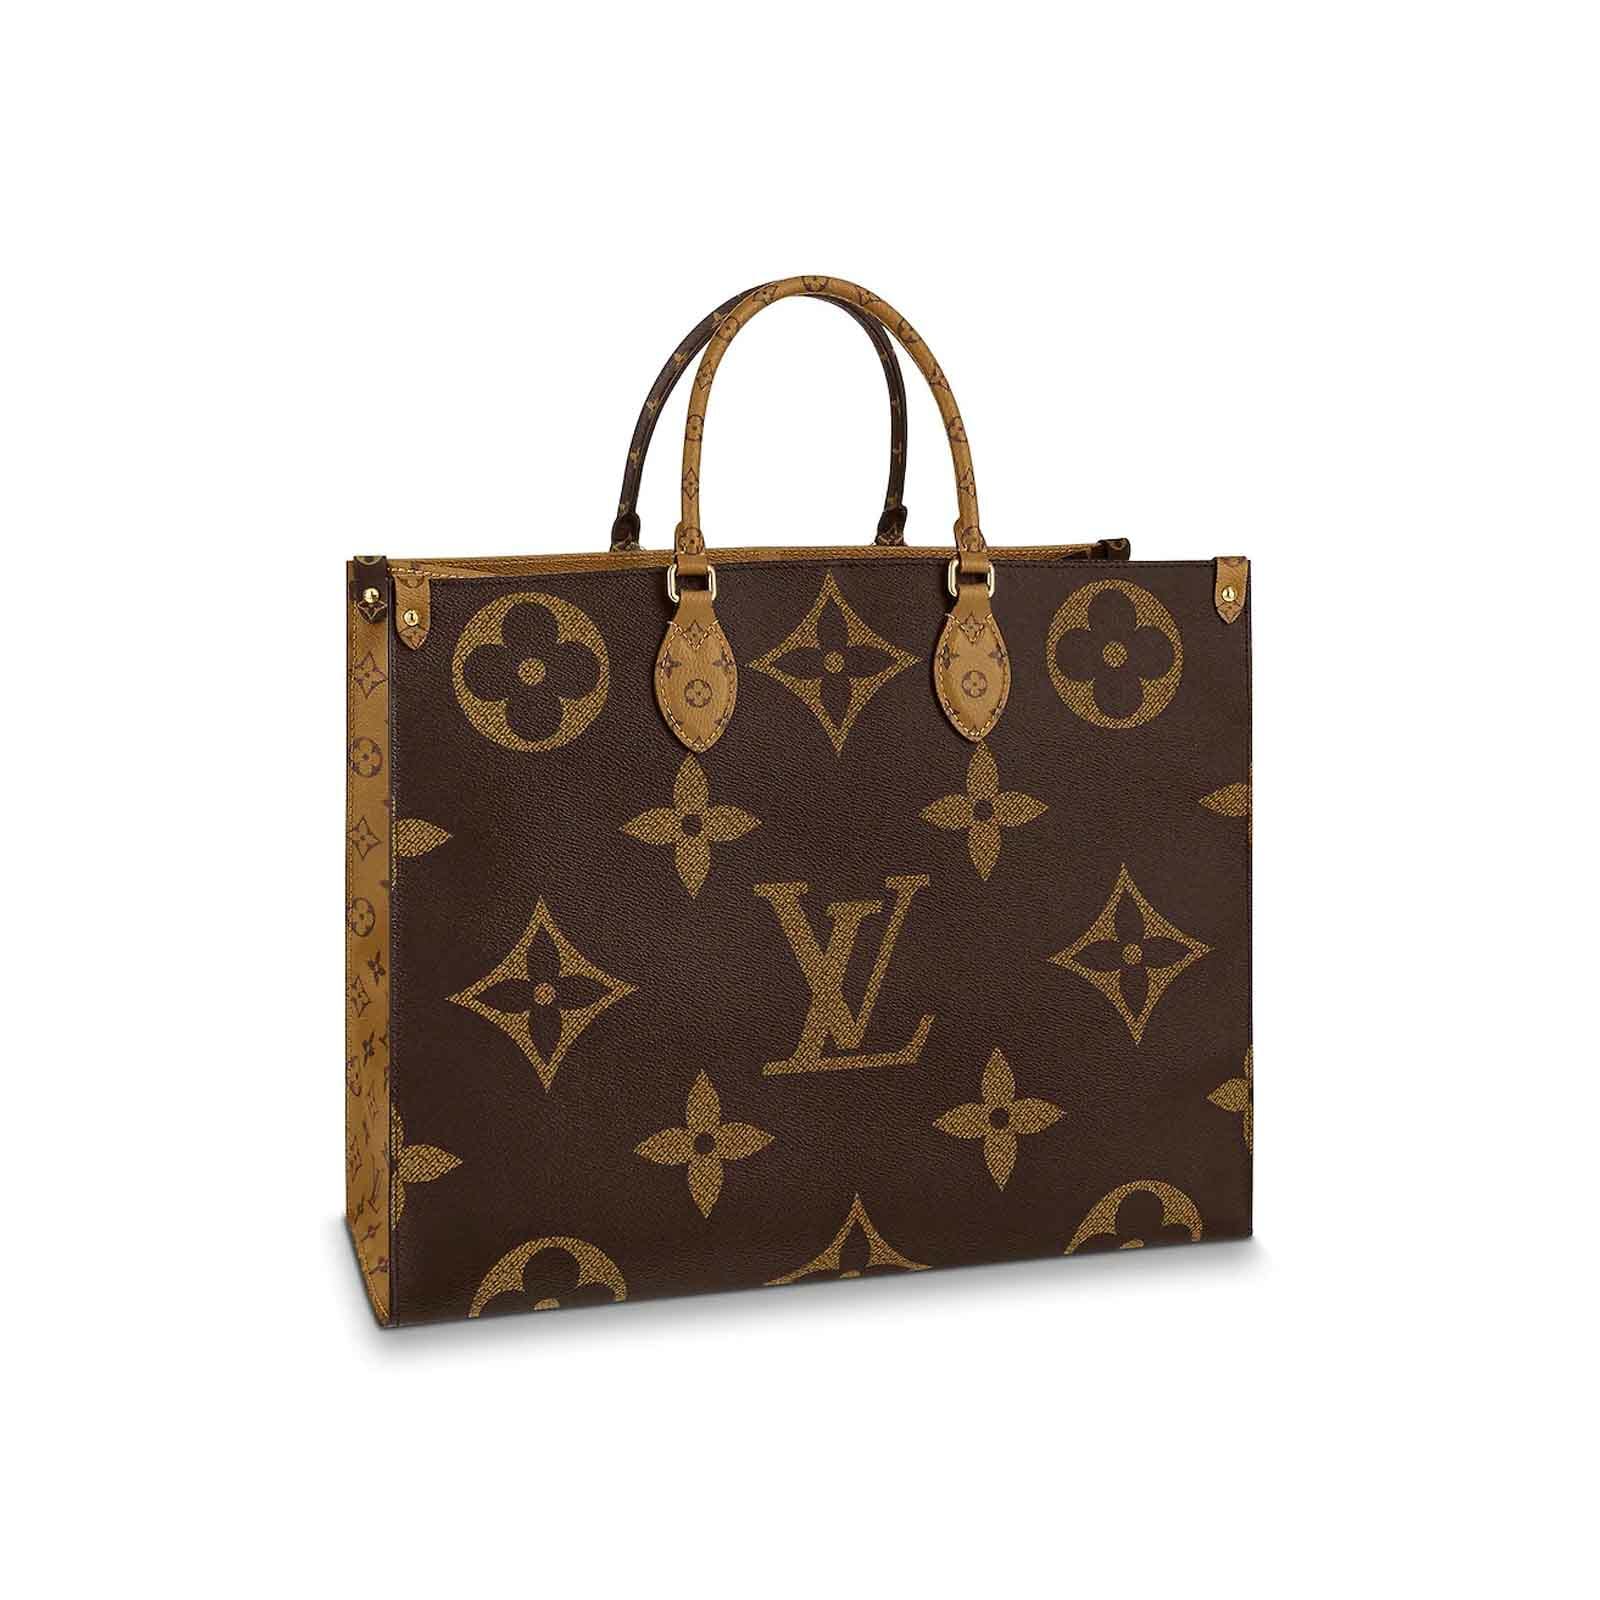 New Microchip In Louis Vuitton Bags - Everything You NEED To Know -  Handbagholic